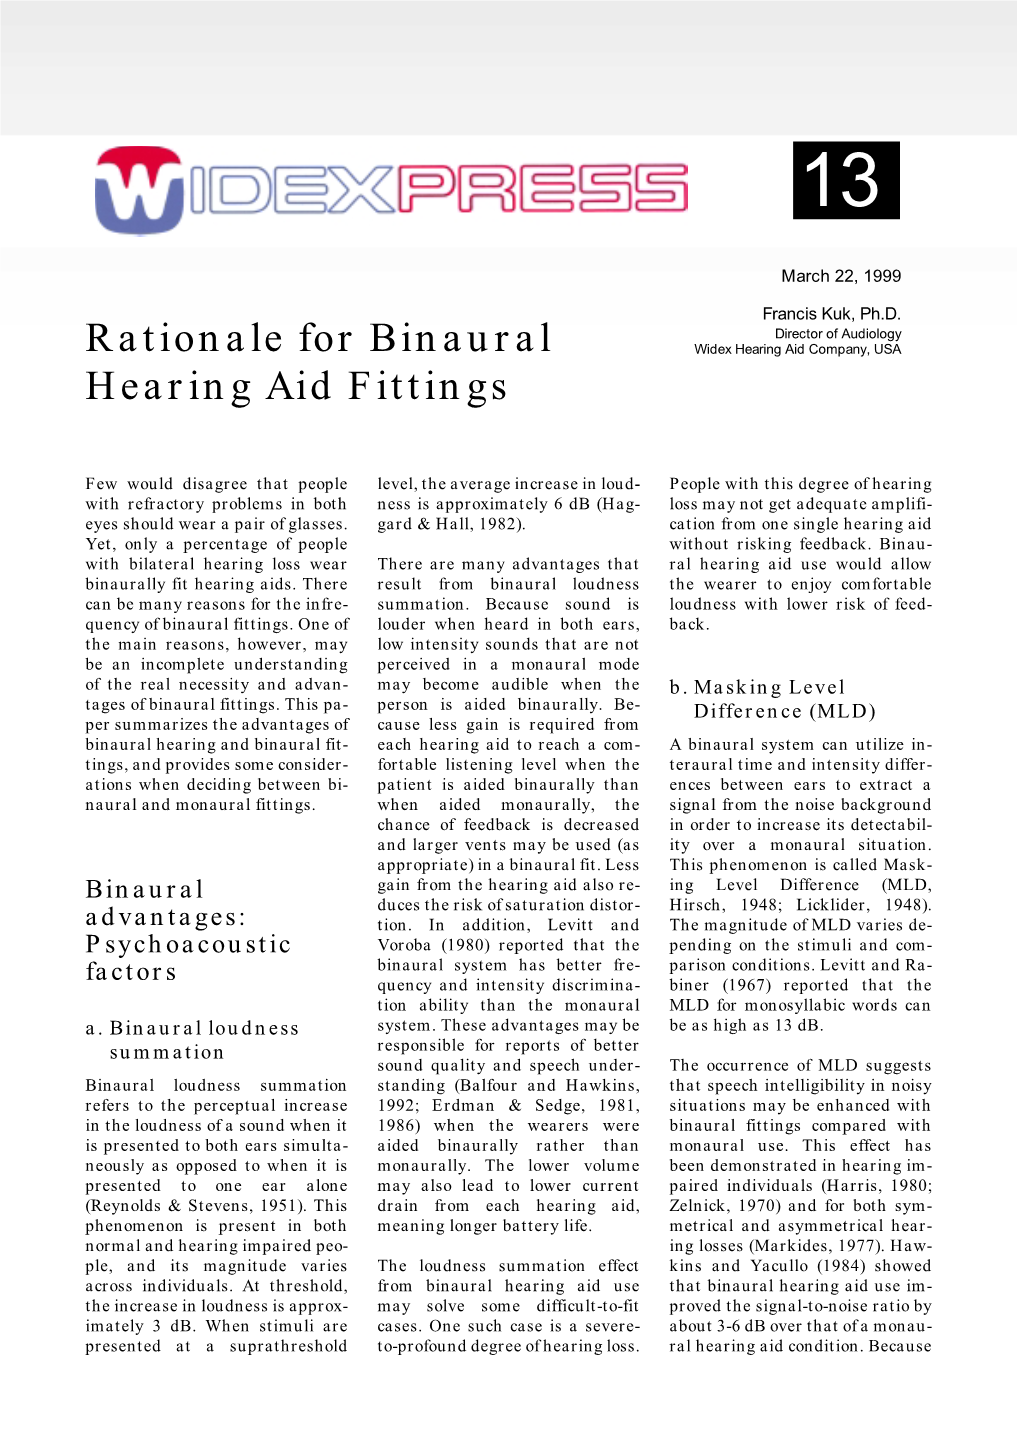 Rationale for Binaural Hearing Aid Fittings